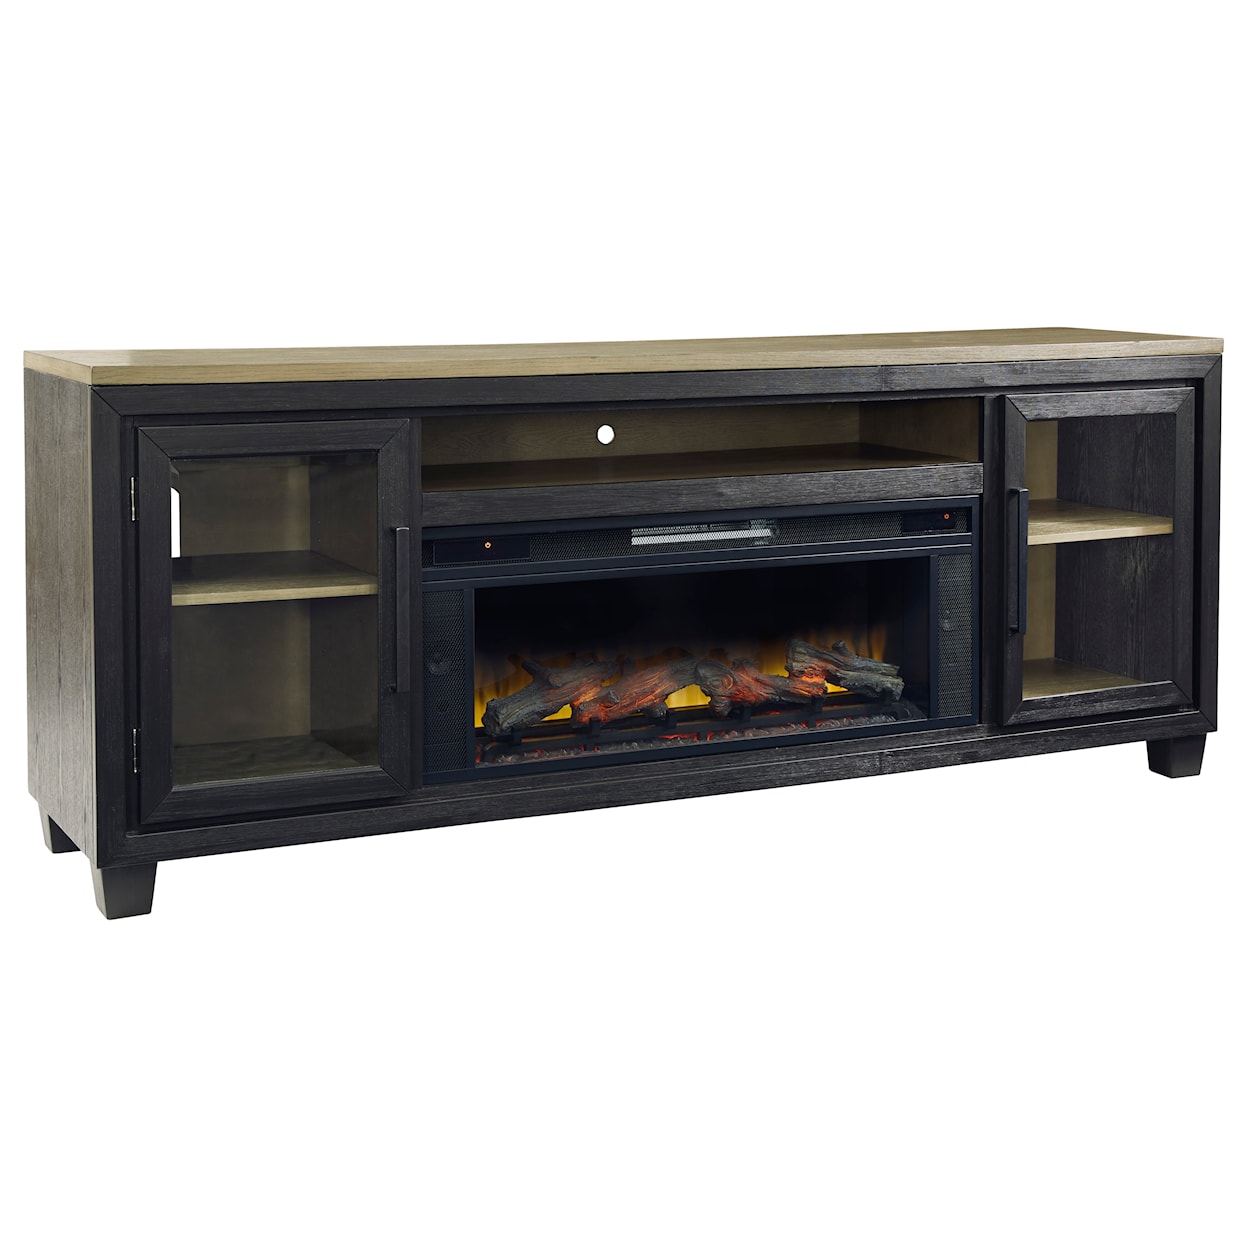 Signature Design by Ashley Foyland 83" TV Stand with Electric Fireplace